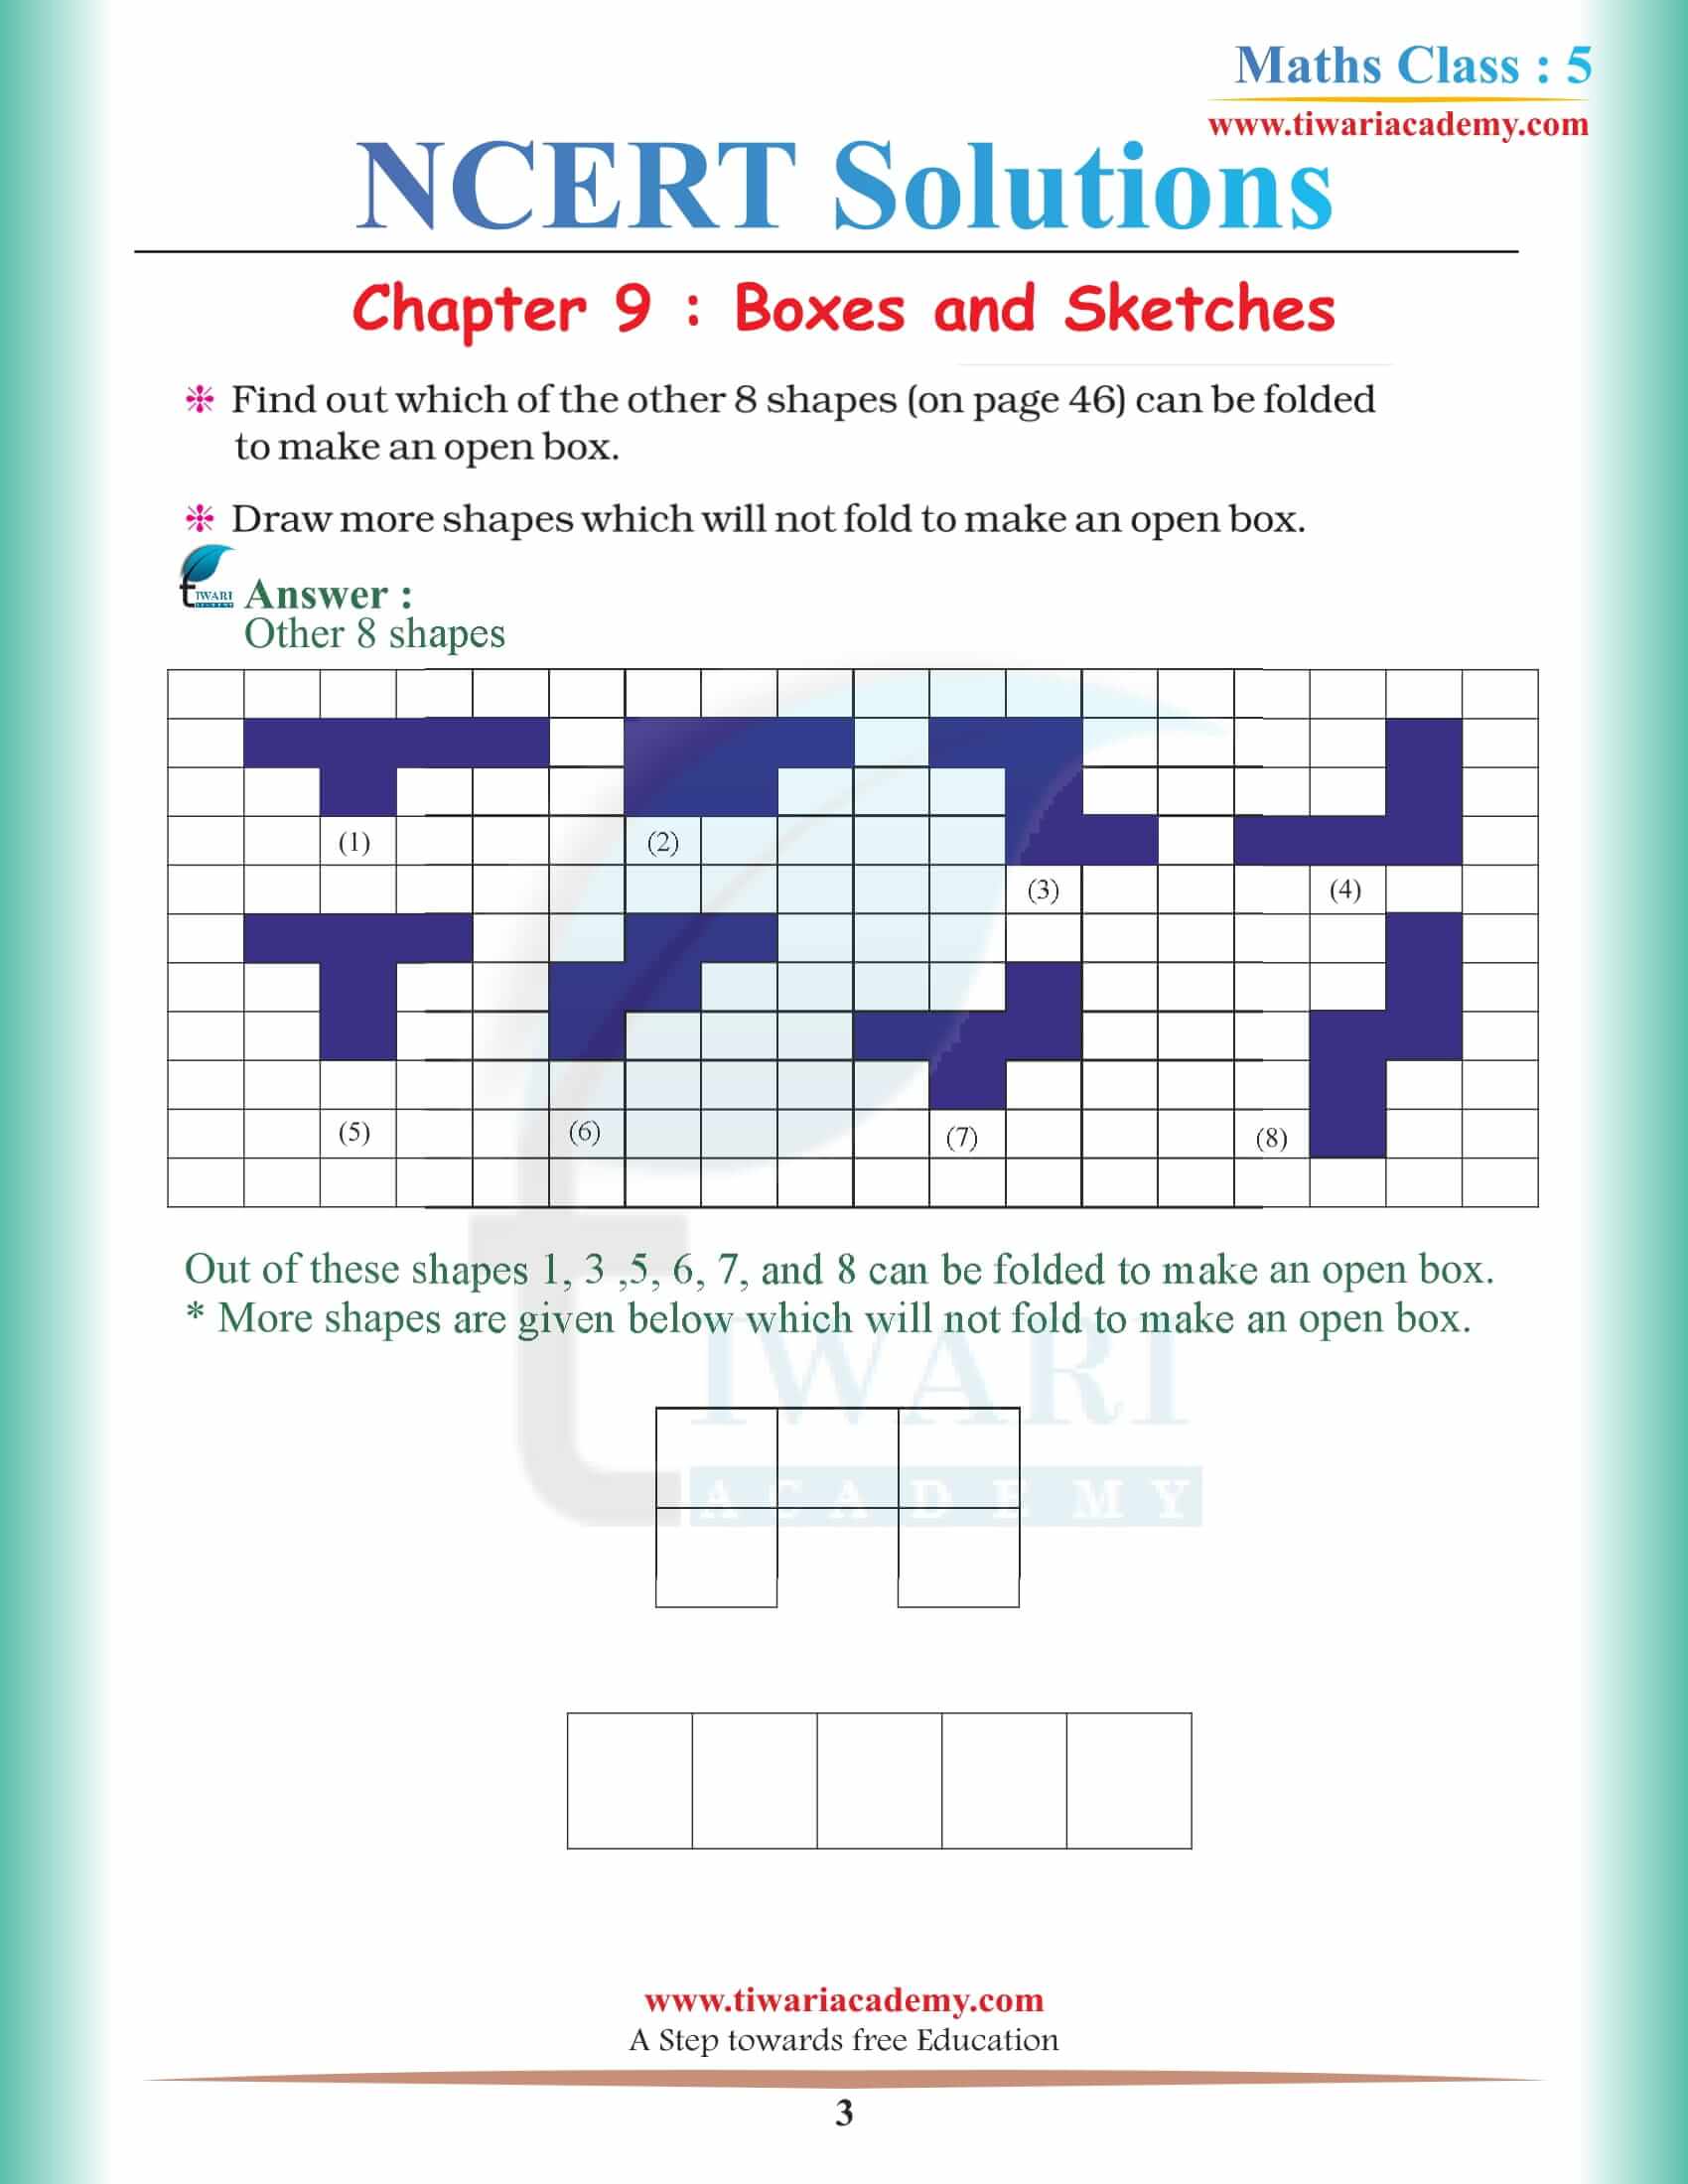 NCERT Solutions for Class 5 Maths Chapter 9 in English Medium